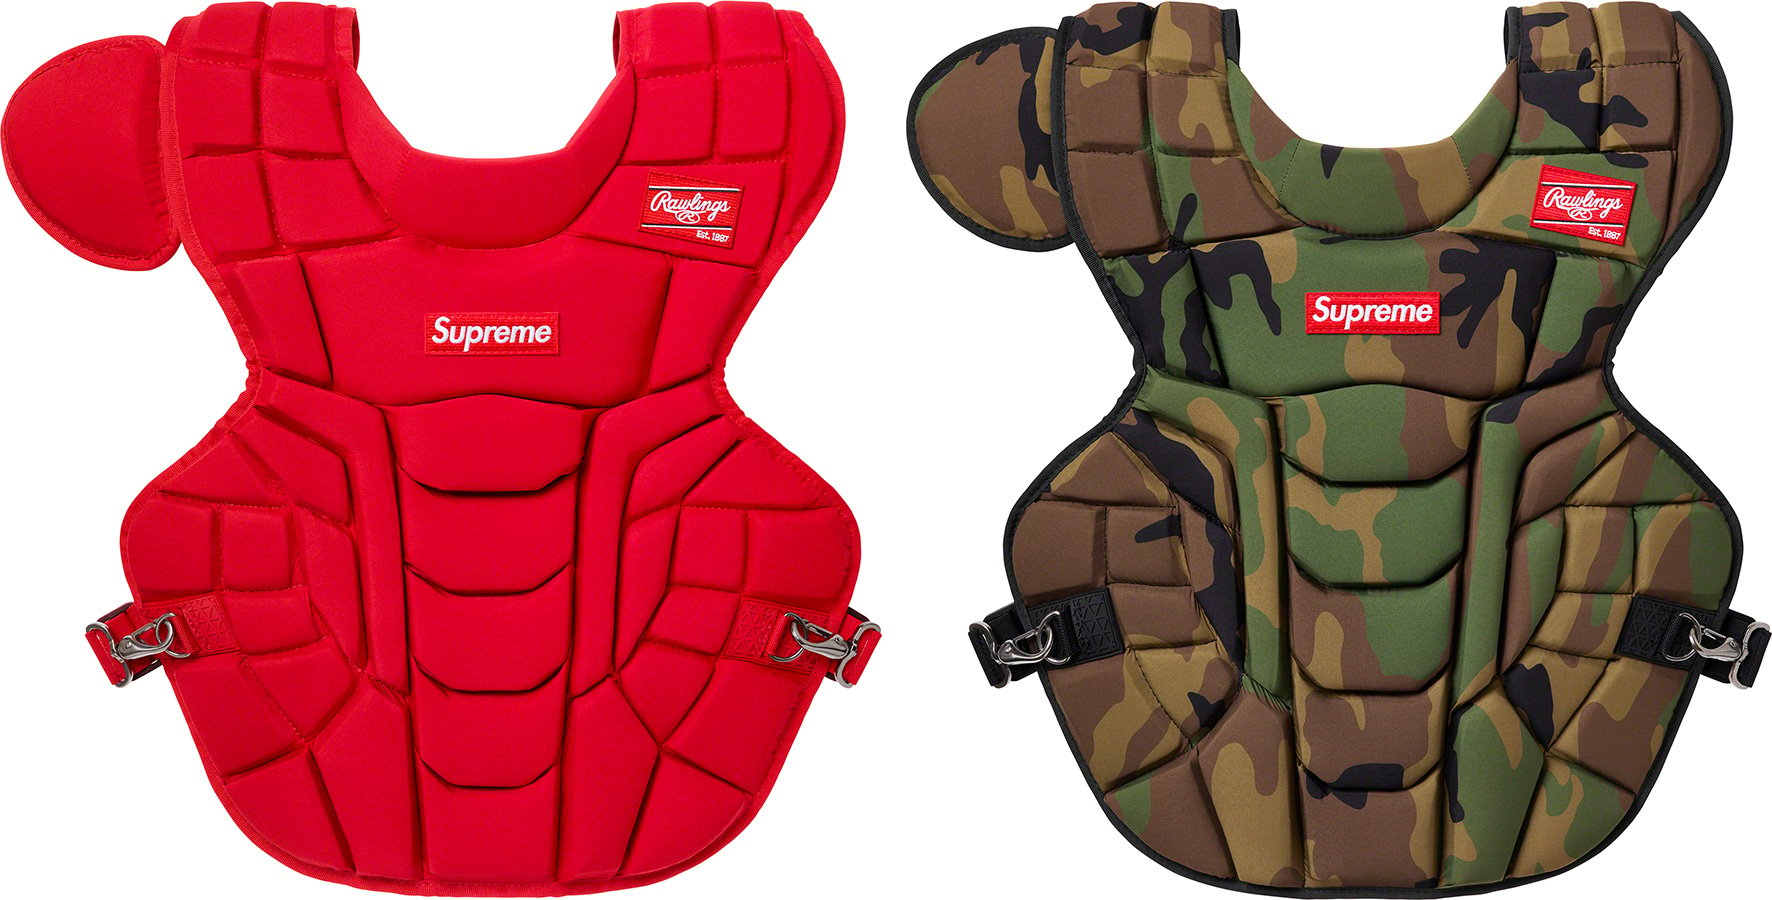 Rawlings Catcher's Chest Protector - spring summer 2020 - Supreme